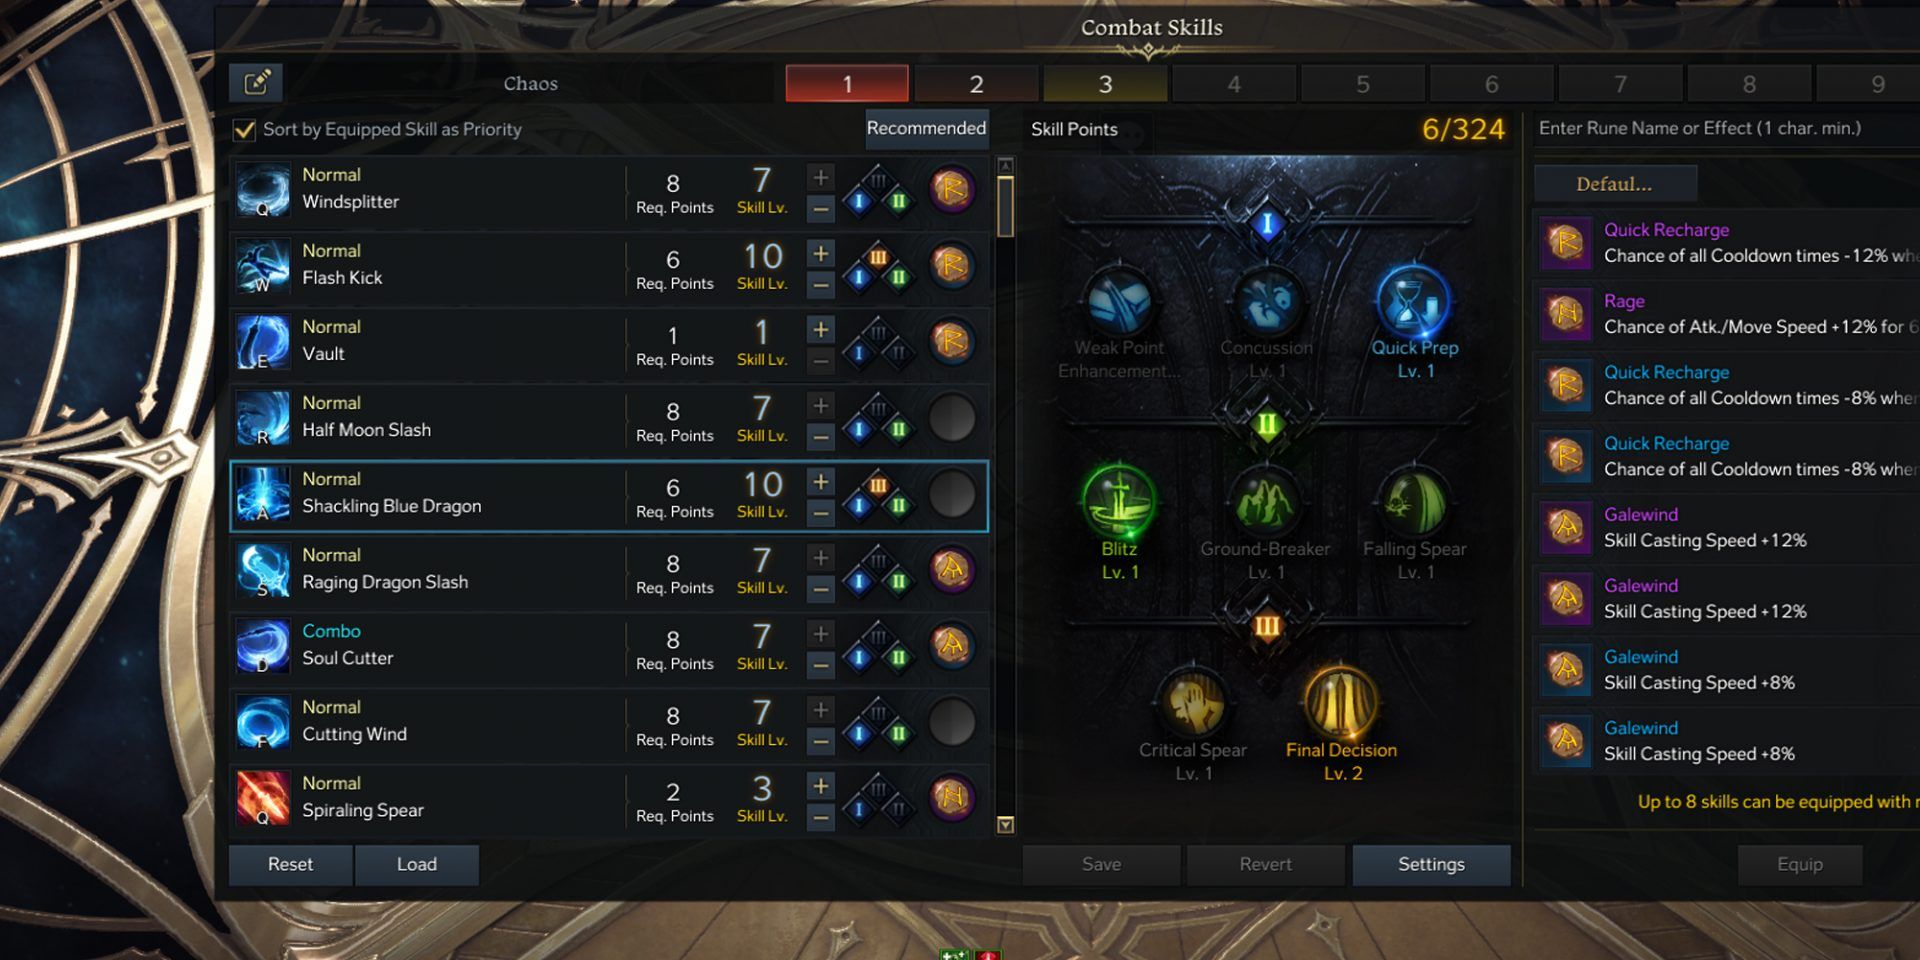 In-game screenshot of Glaivier skill selection for Chaos Dungeons in Lost Ark